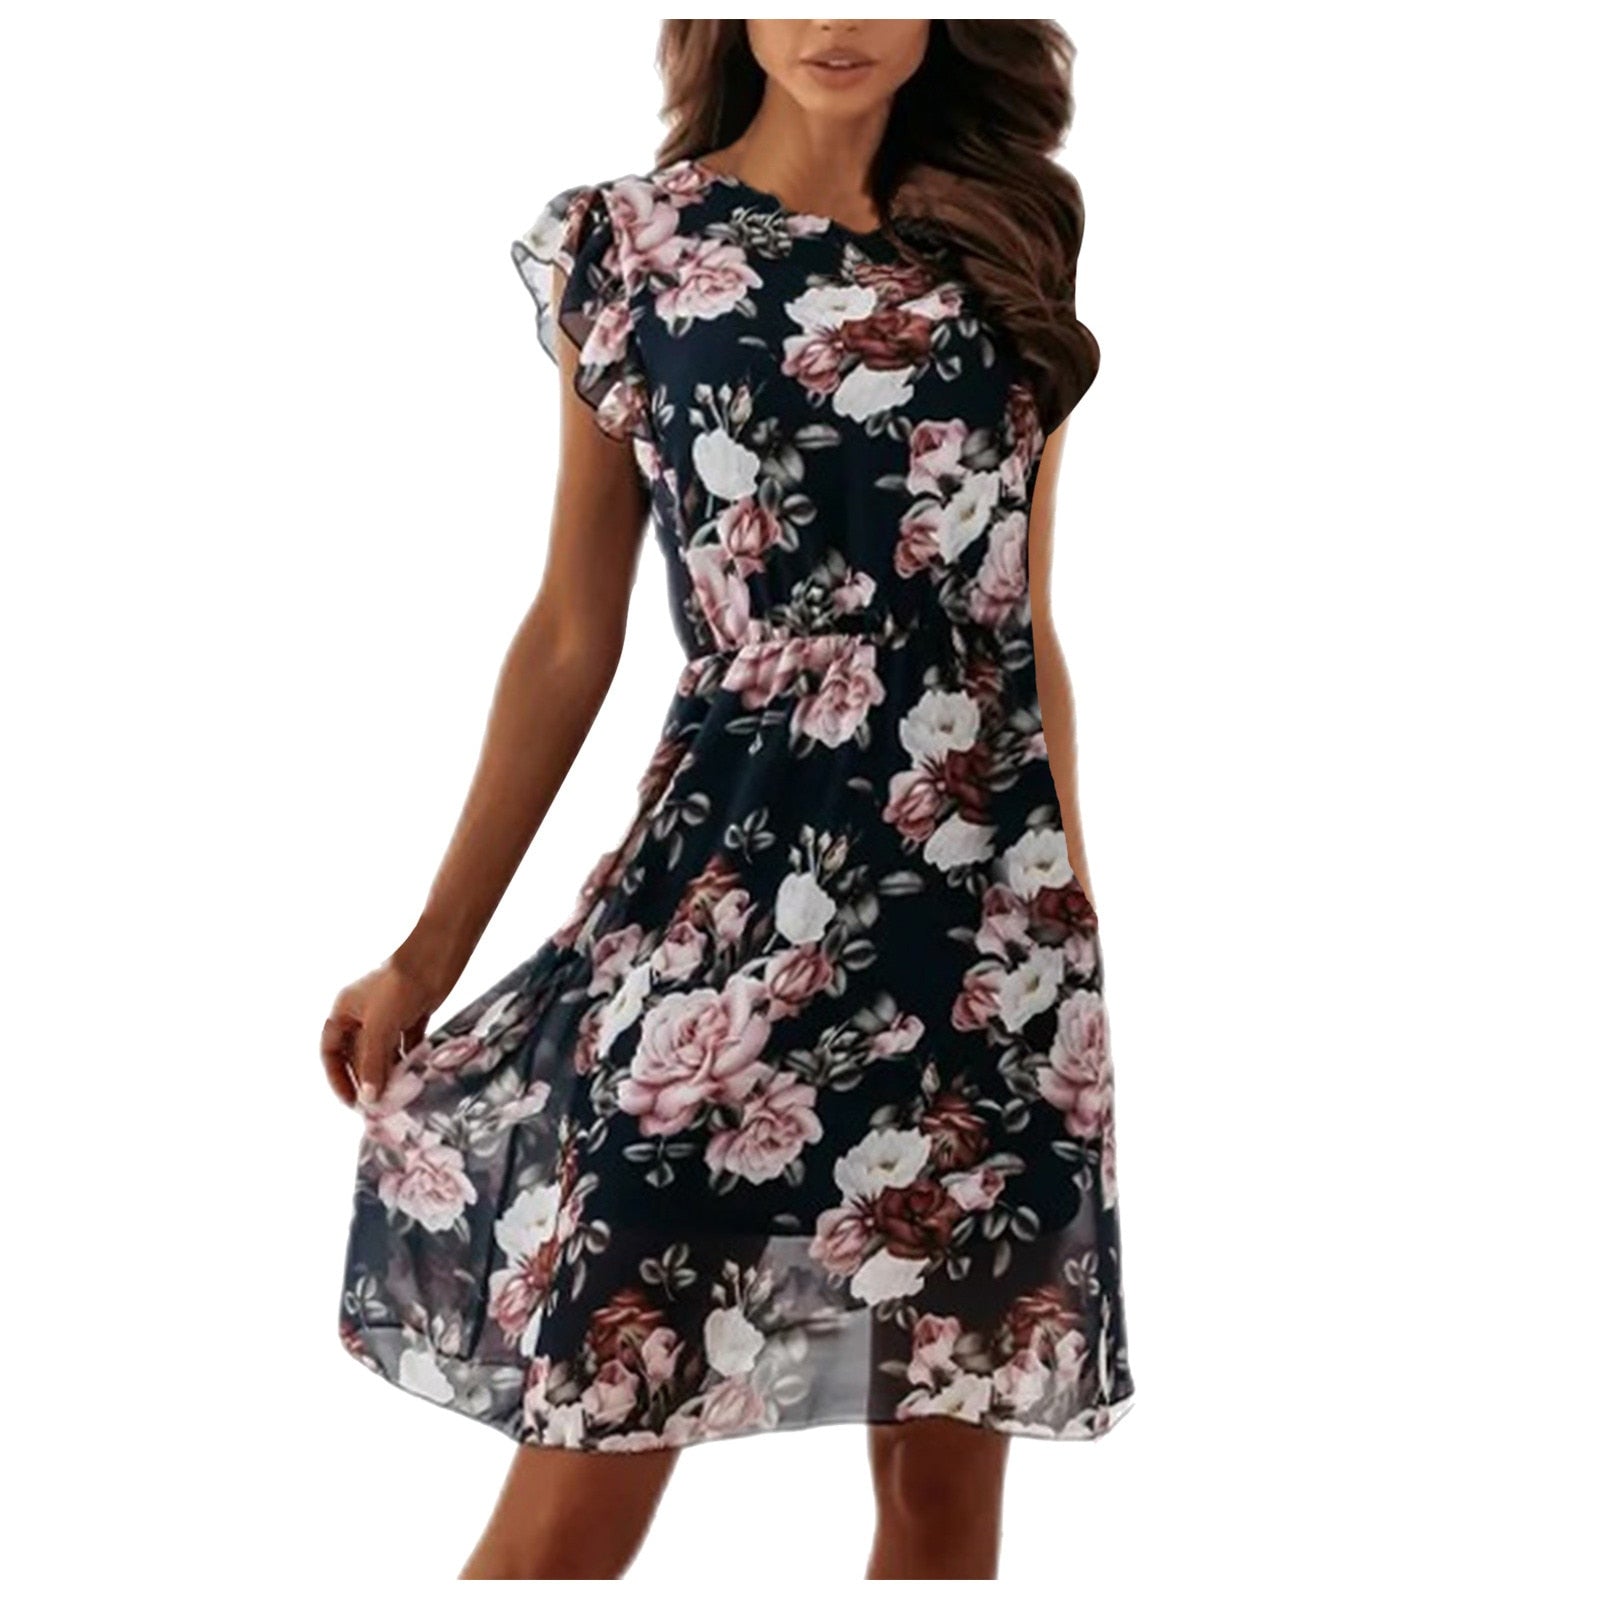 Short Floral Dress with Ruffle on the Sleeves